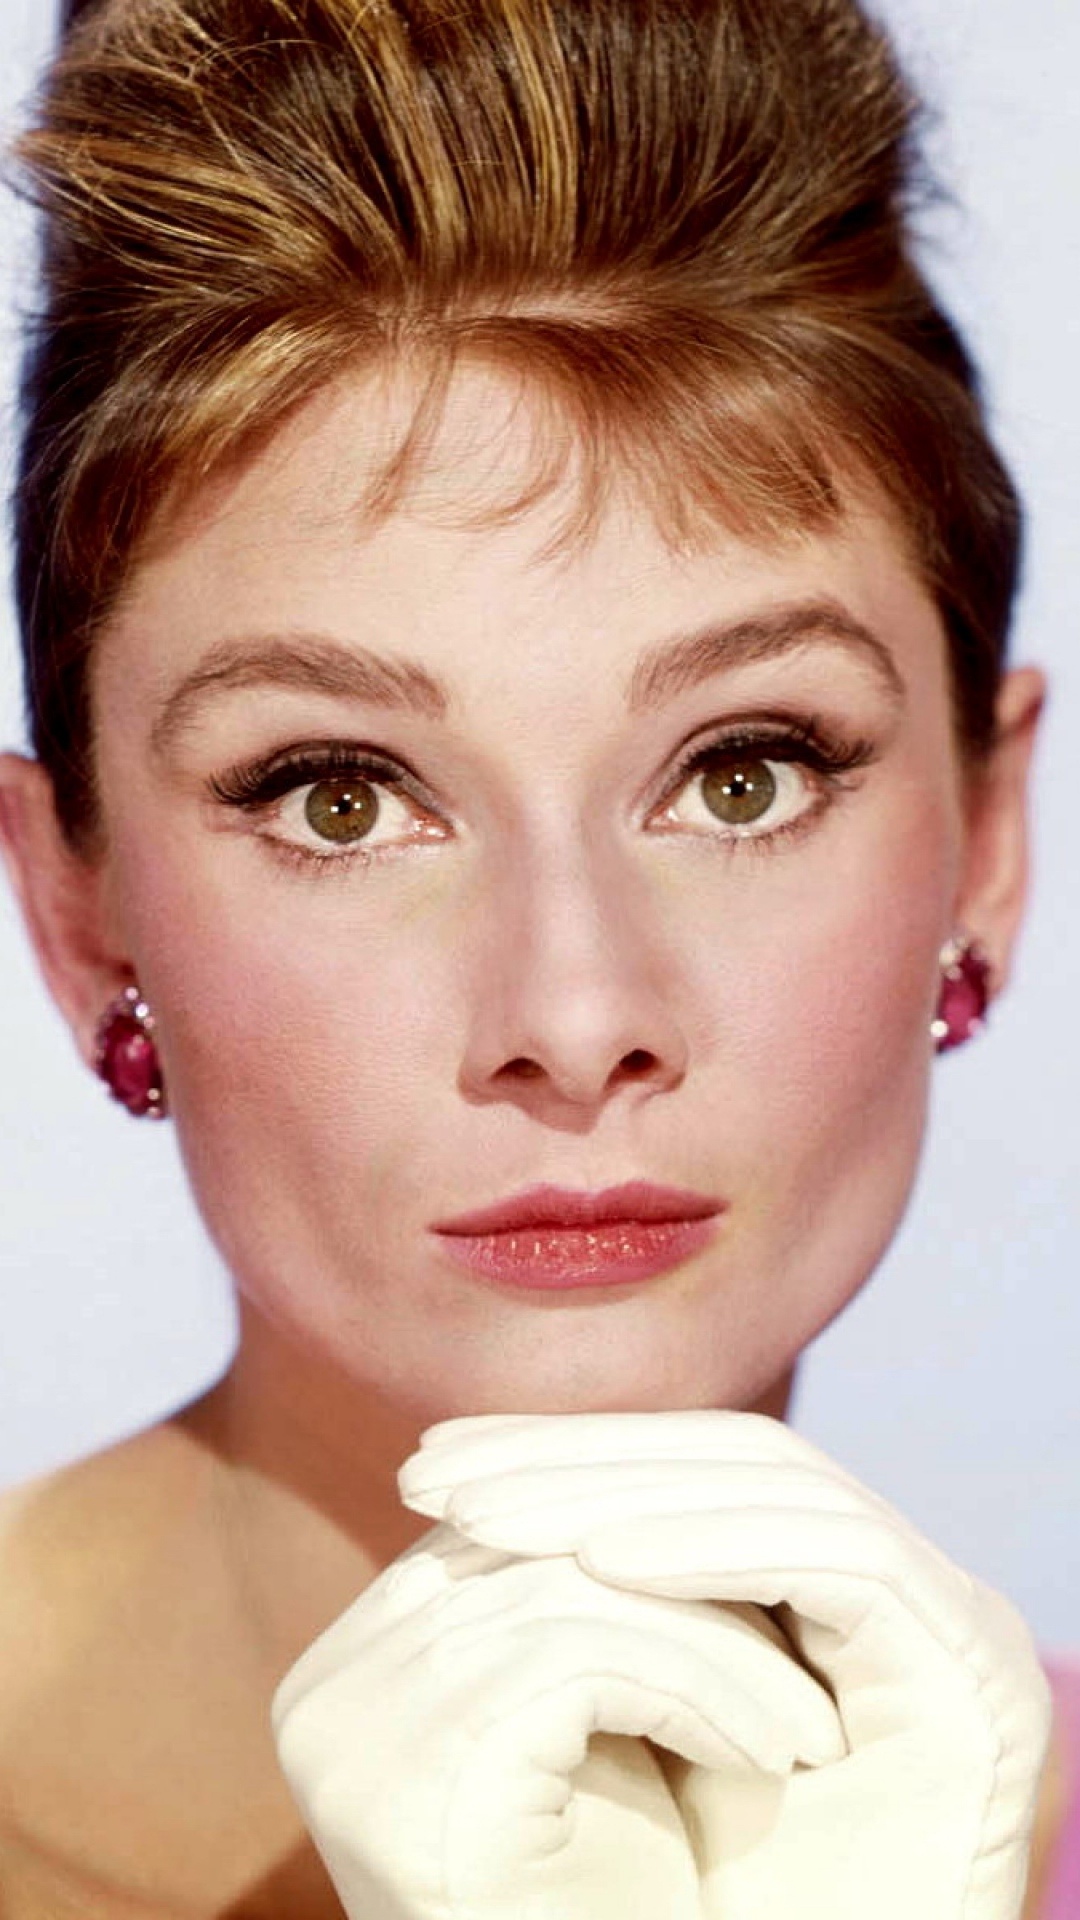 Free wallpaper for android, Audrey Hepburn, Movie star elegance, High-quality image, 1080x1920 Full HD Phone